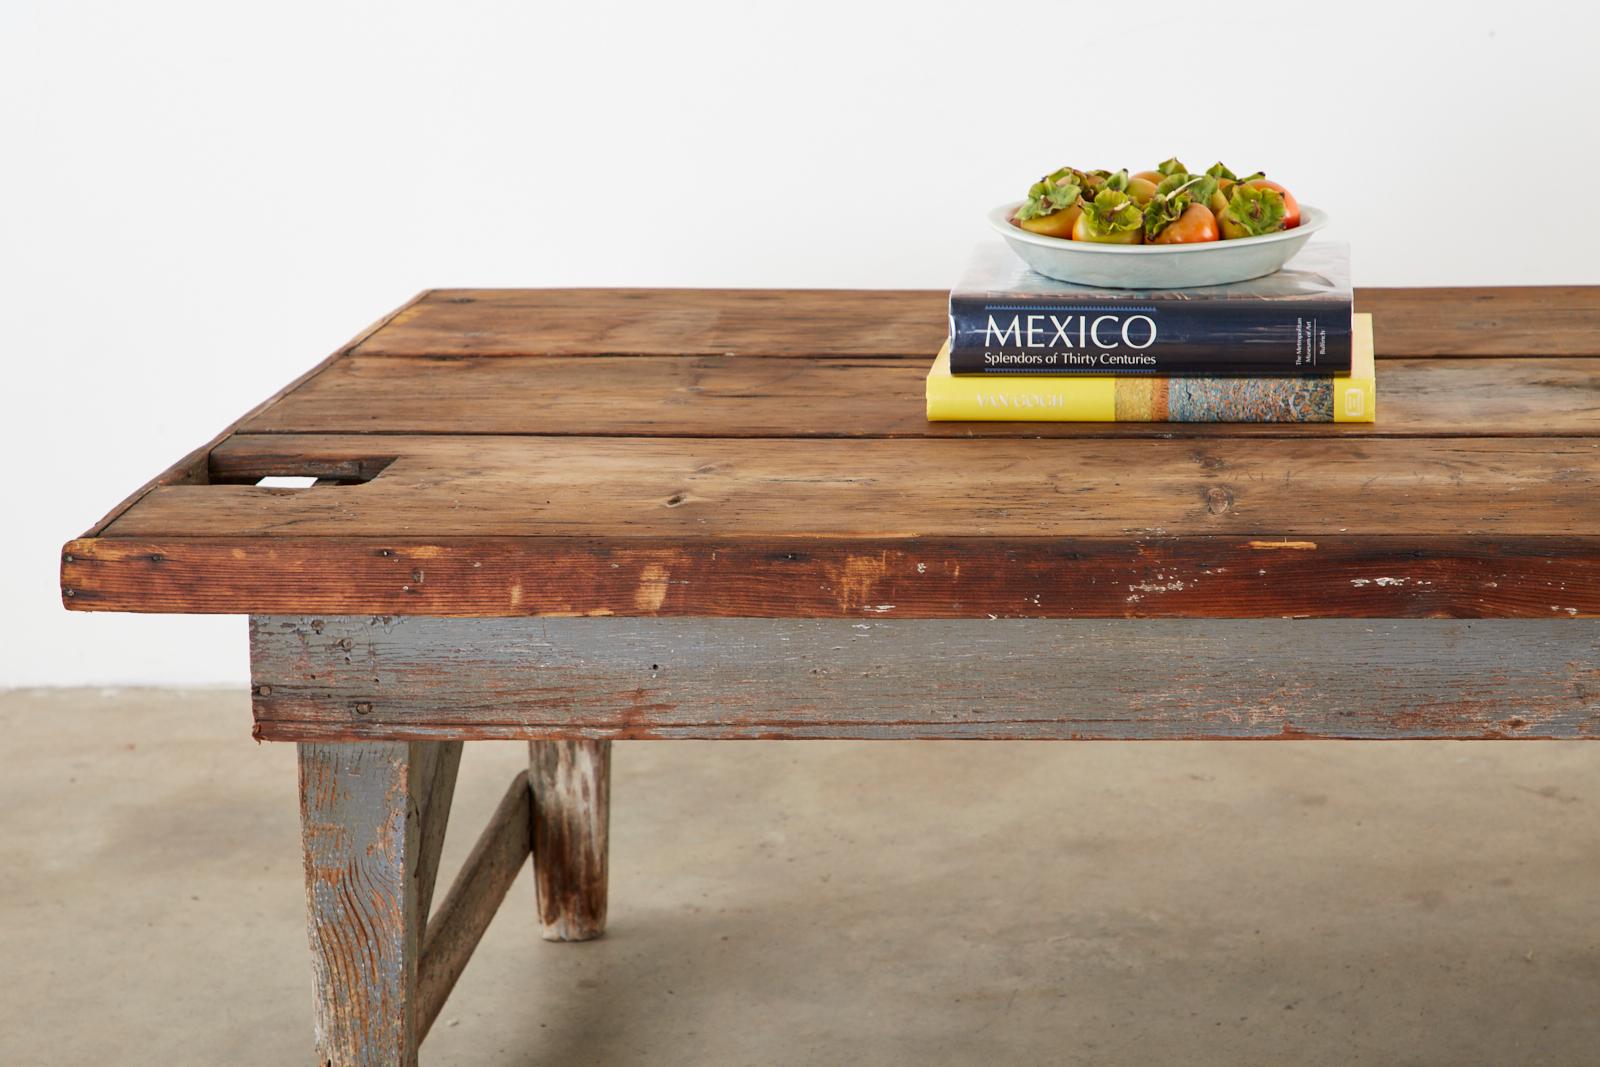 Rustic American Primitive work table or coffee table featuring a painted base. Constructed from pine having a thick plank top with two cut-outs. The top has a natural unpainted top with a beautifully aged patina. The top planks are bordered with